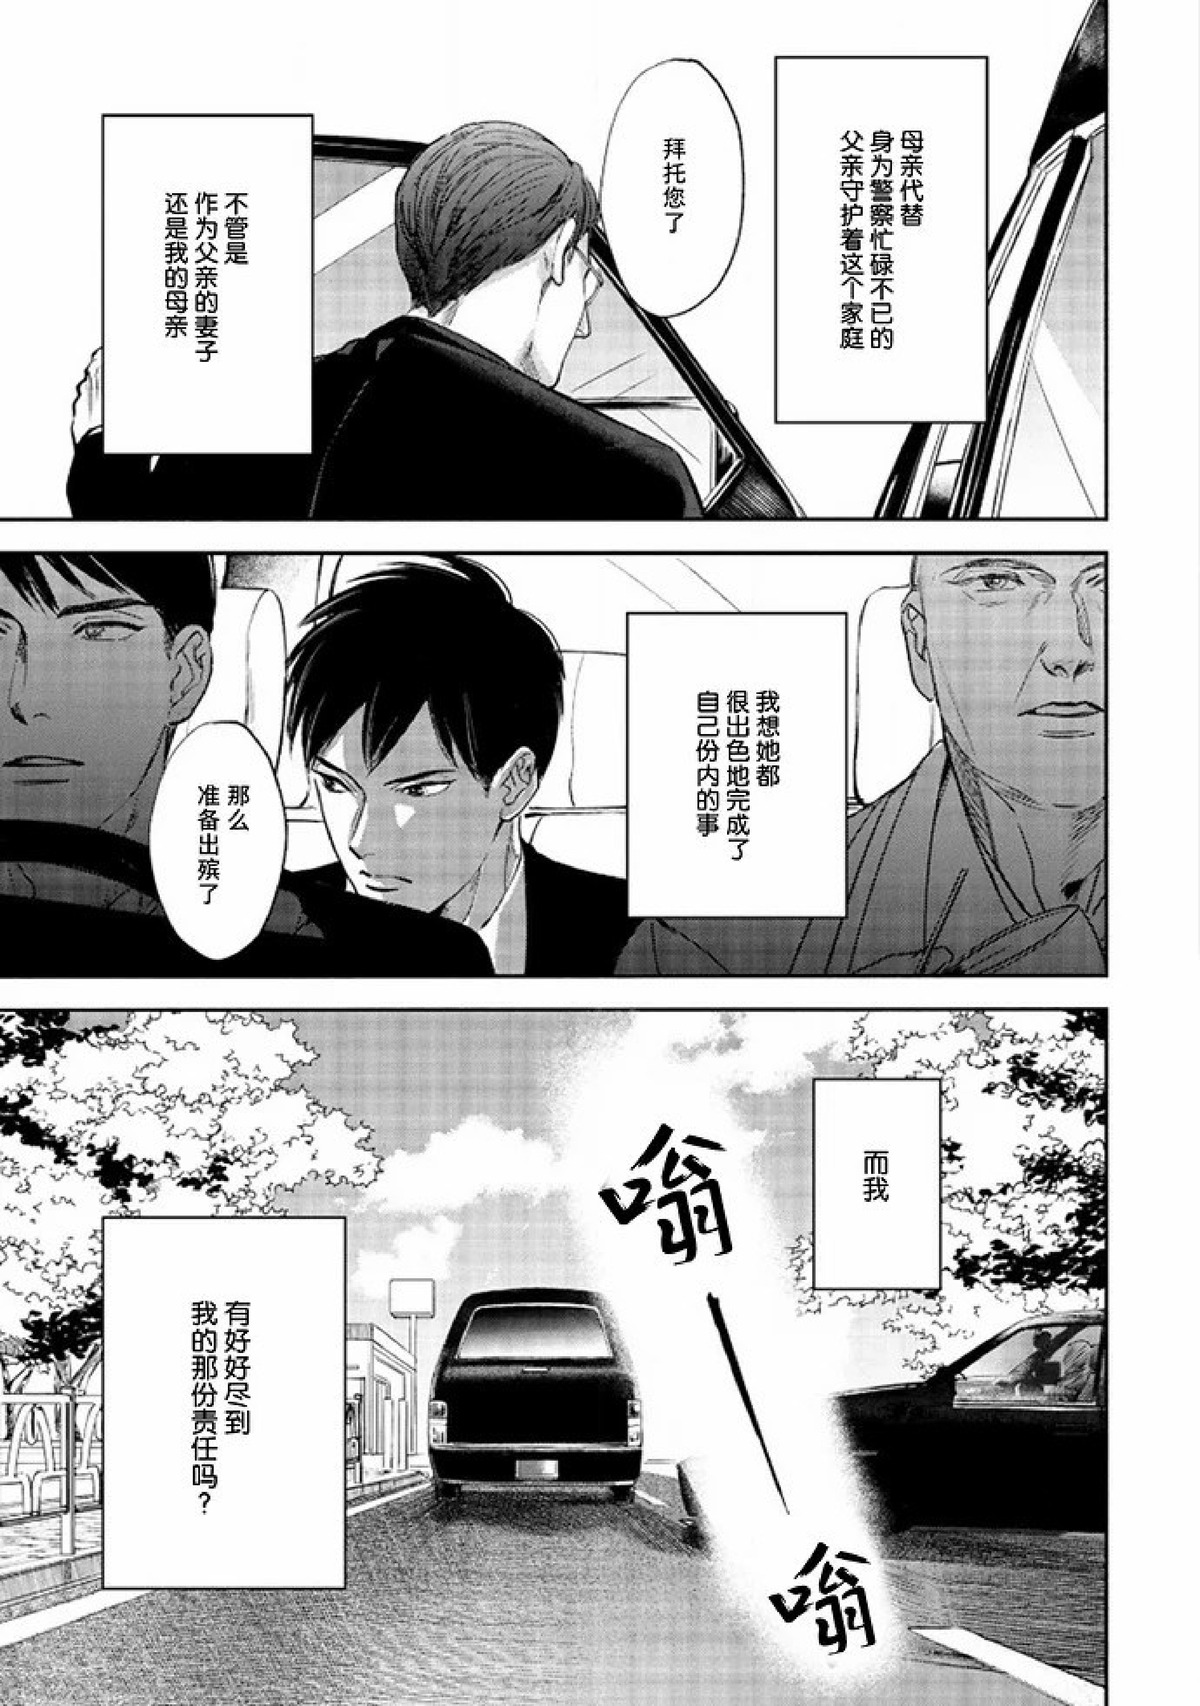 【Two sides of the same coin[腐漫]】漫画-（上卷01-02）章节漫画下拉式图片-15.jpg